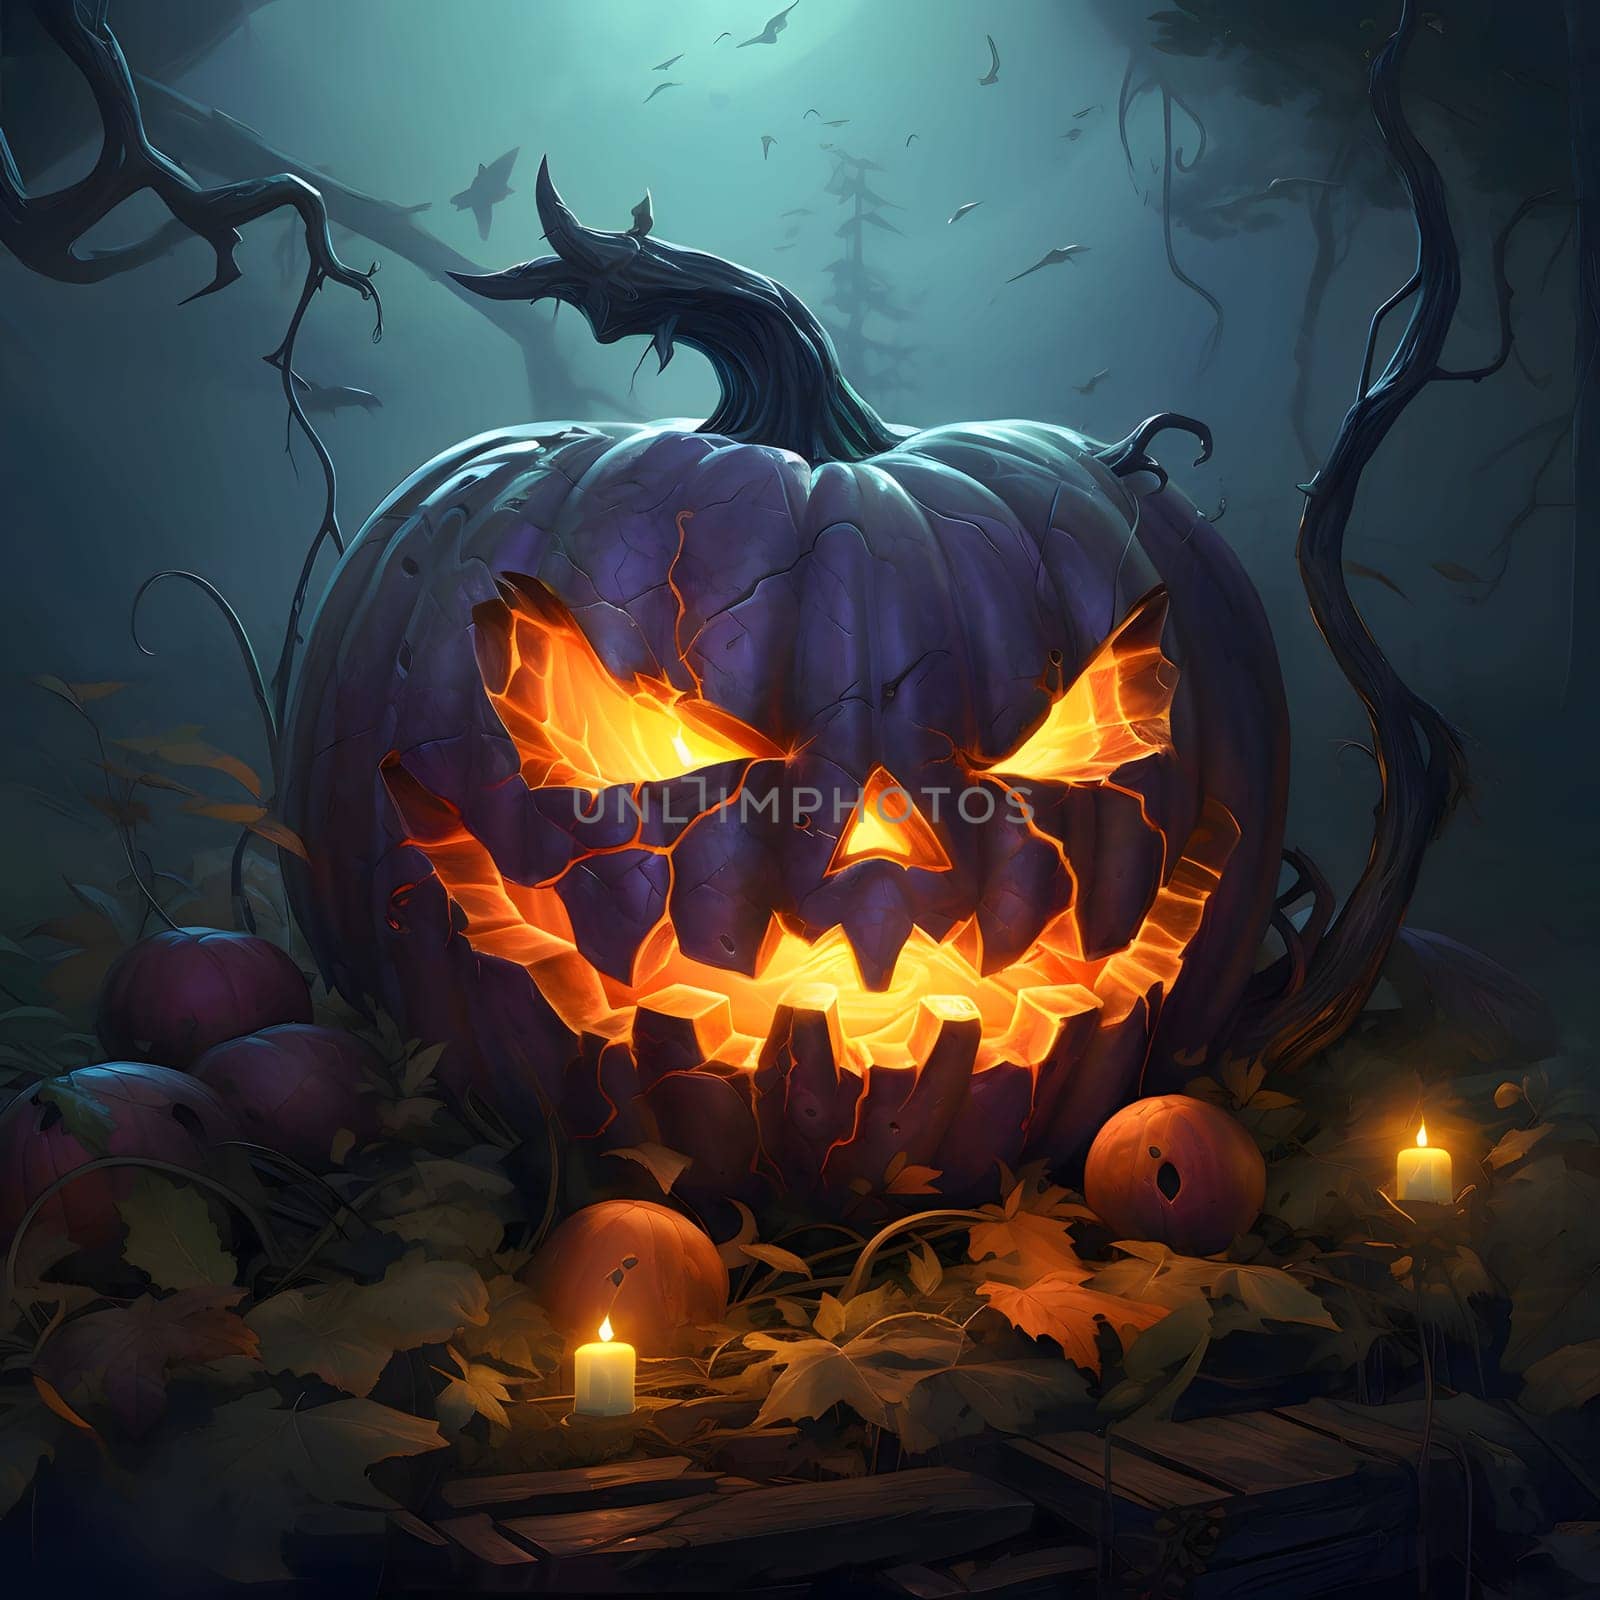 Big dark glowing fire jack-o-lantern pumpkin around leaves and candles in the background, darkness, a Halloween image. by ThemesS